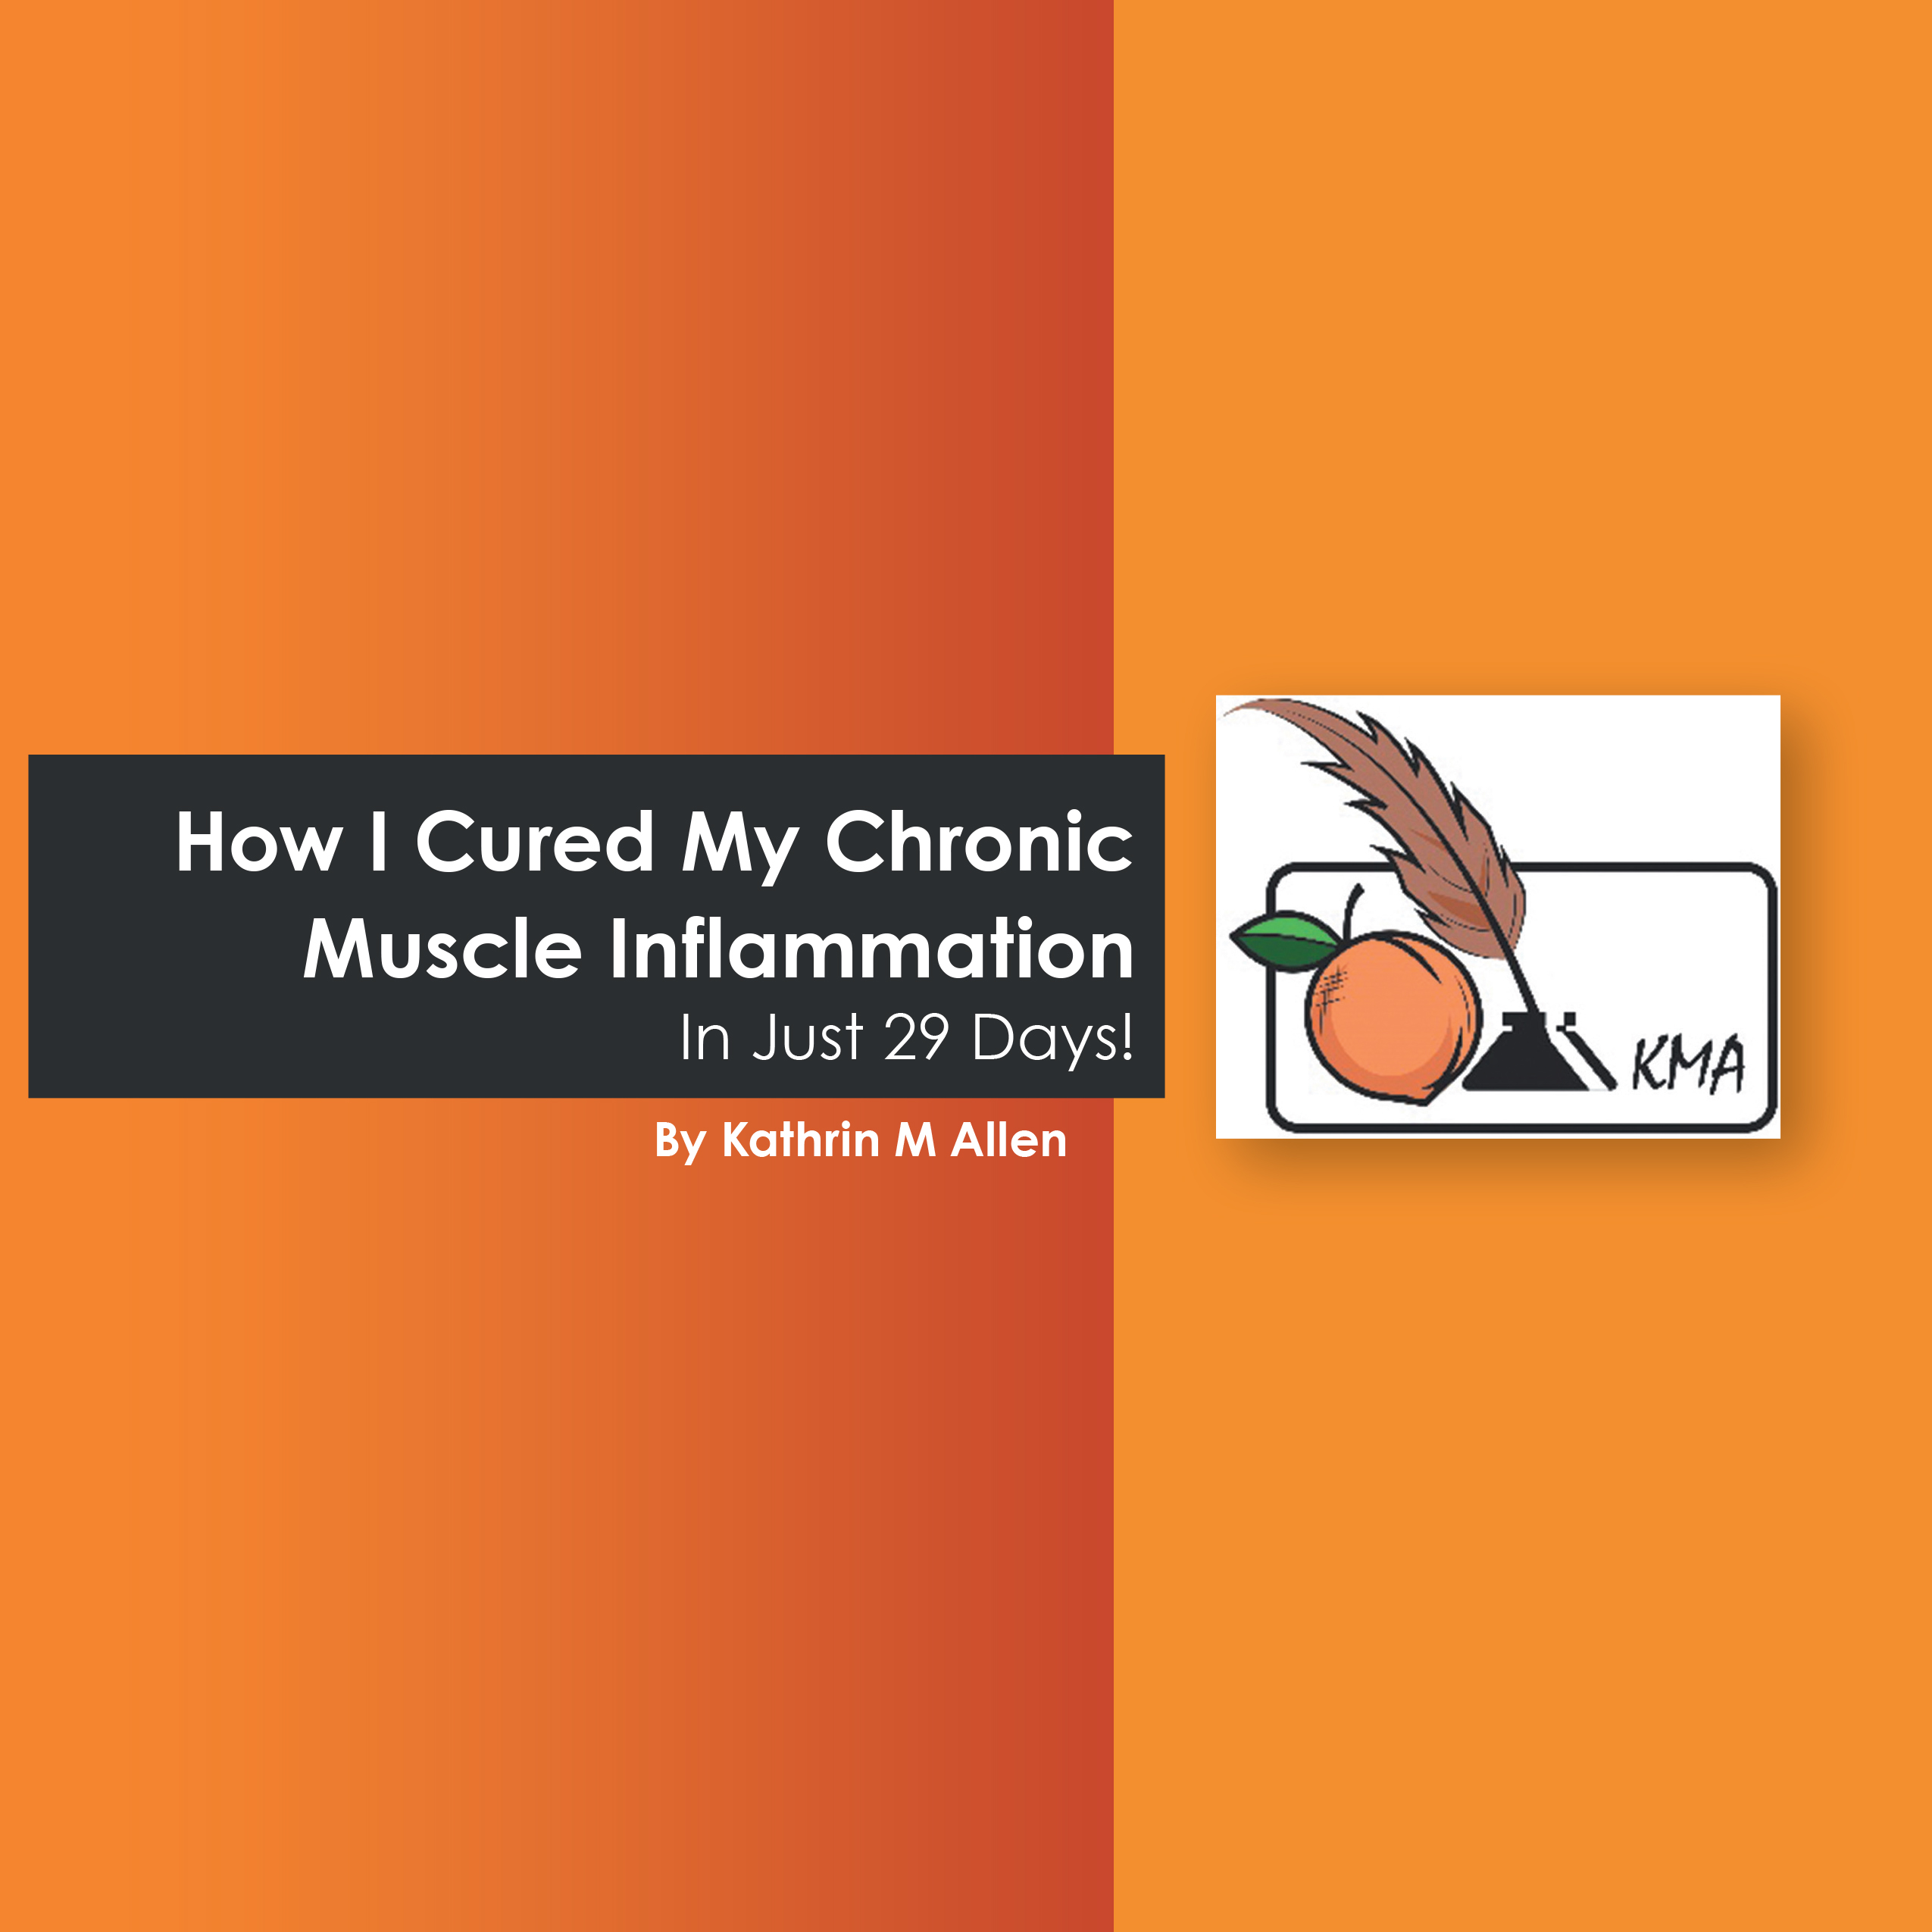 “How I Cured My Chronic Muscle Inflammation. In Just 29 Days!”
By Kathrin M Allen
